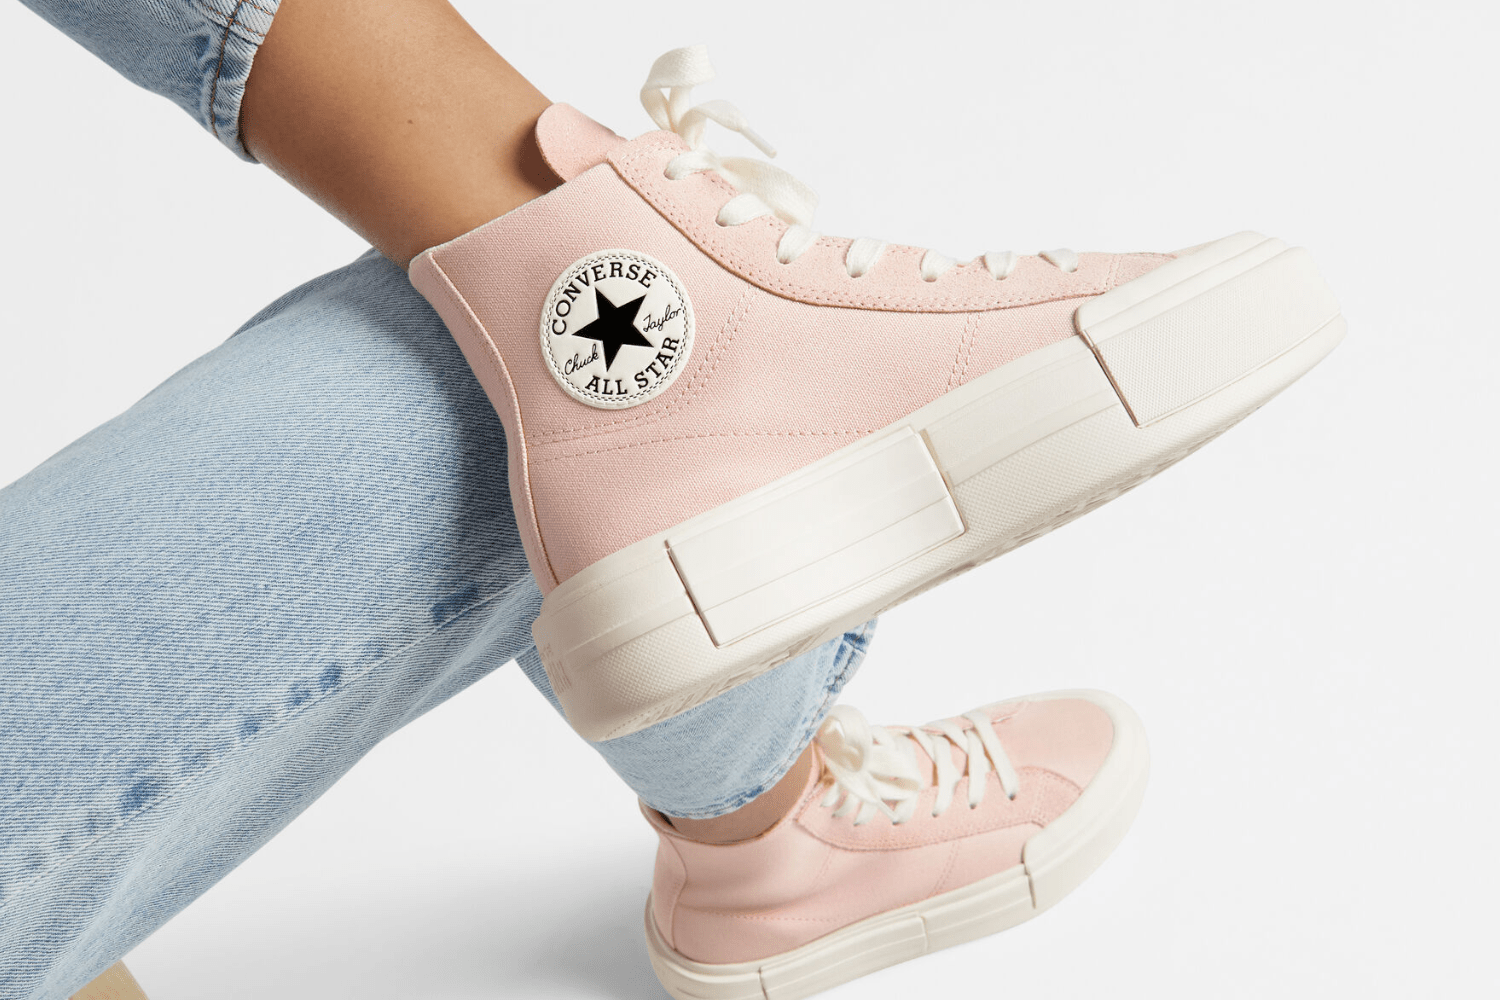 Converse introduces the Chuck Taylor All Star Cruise silhouette